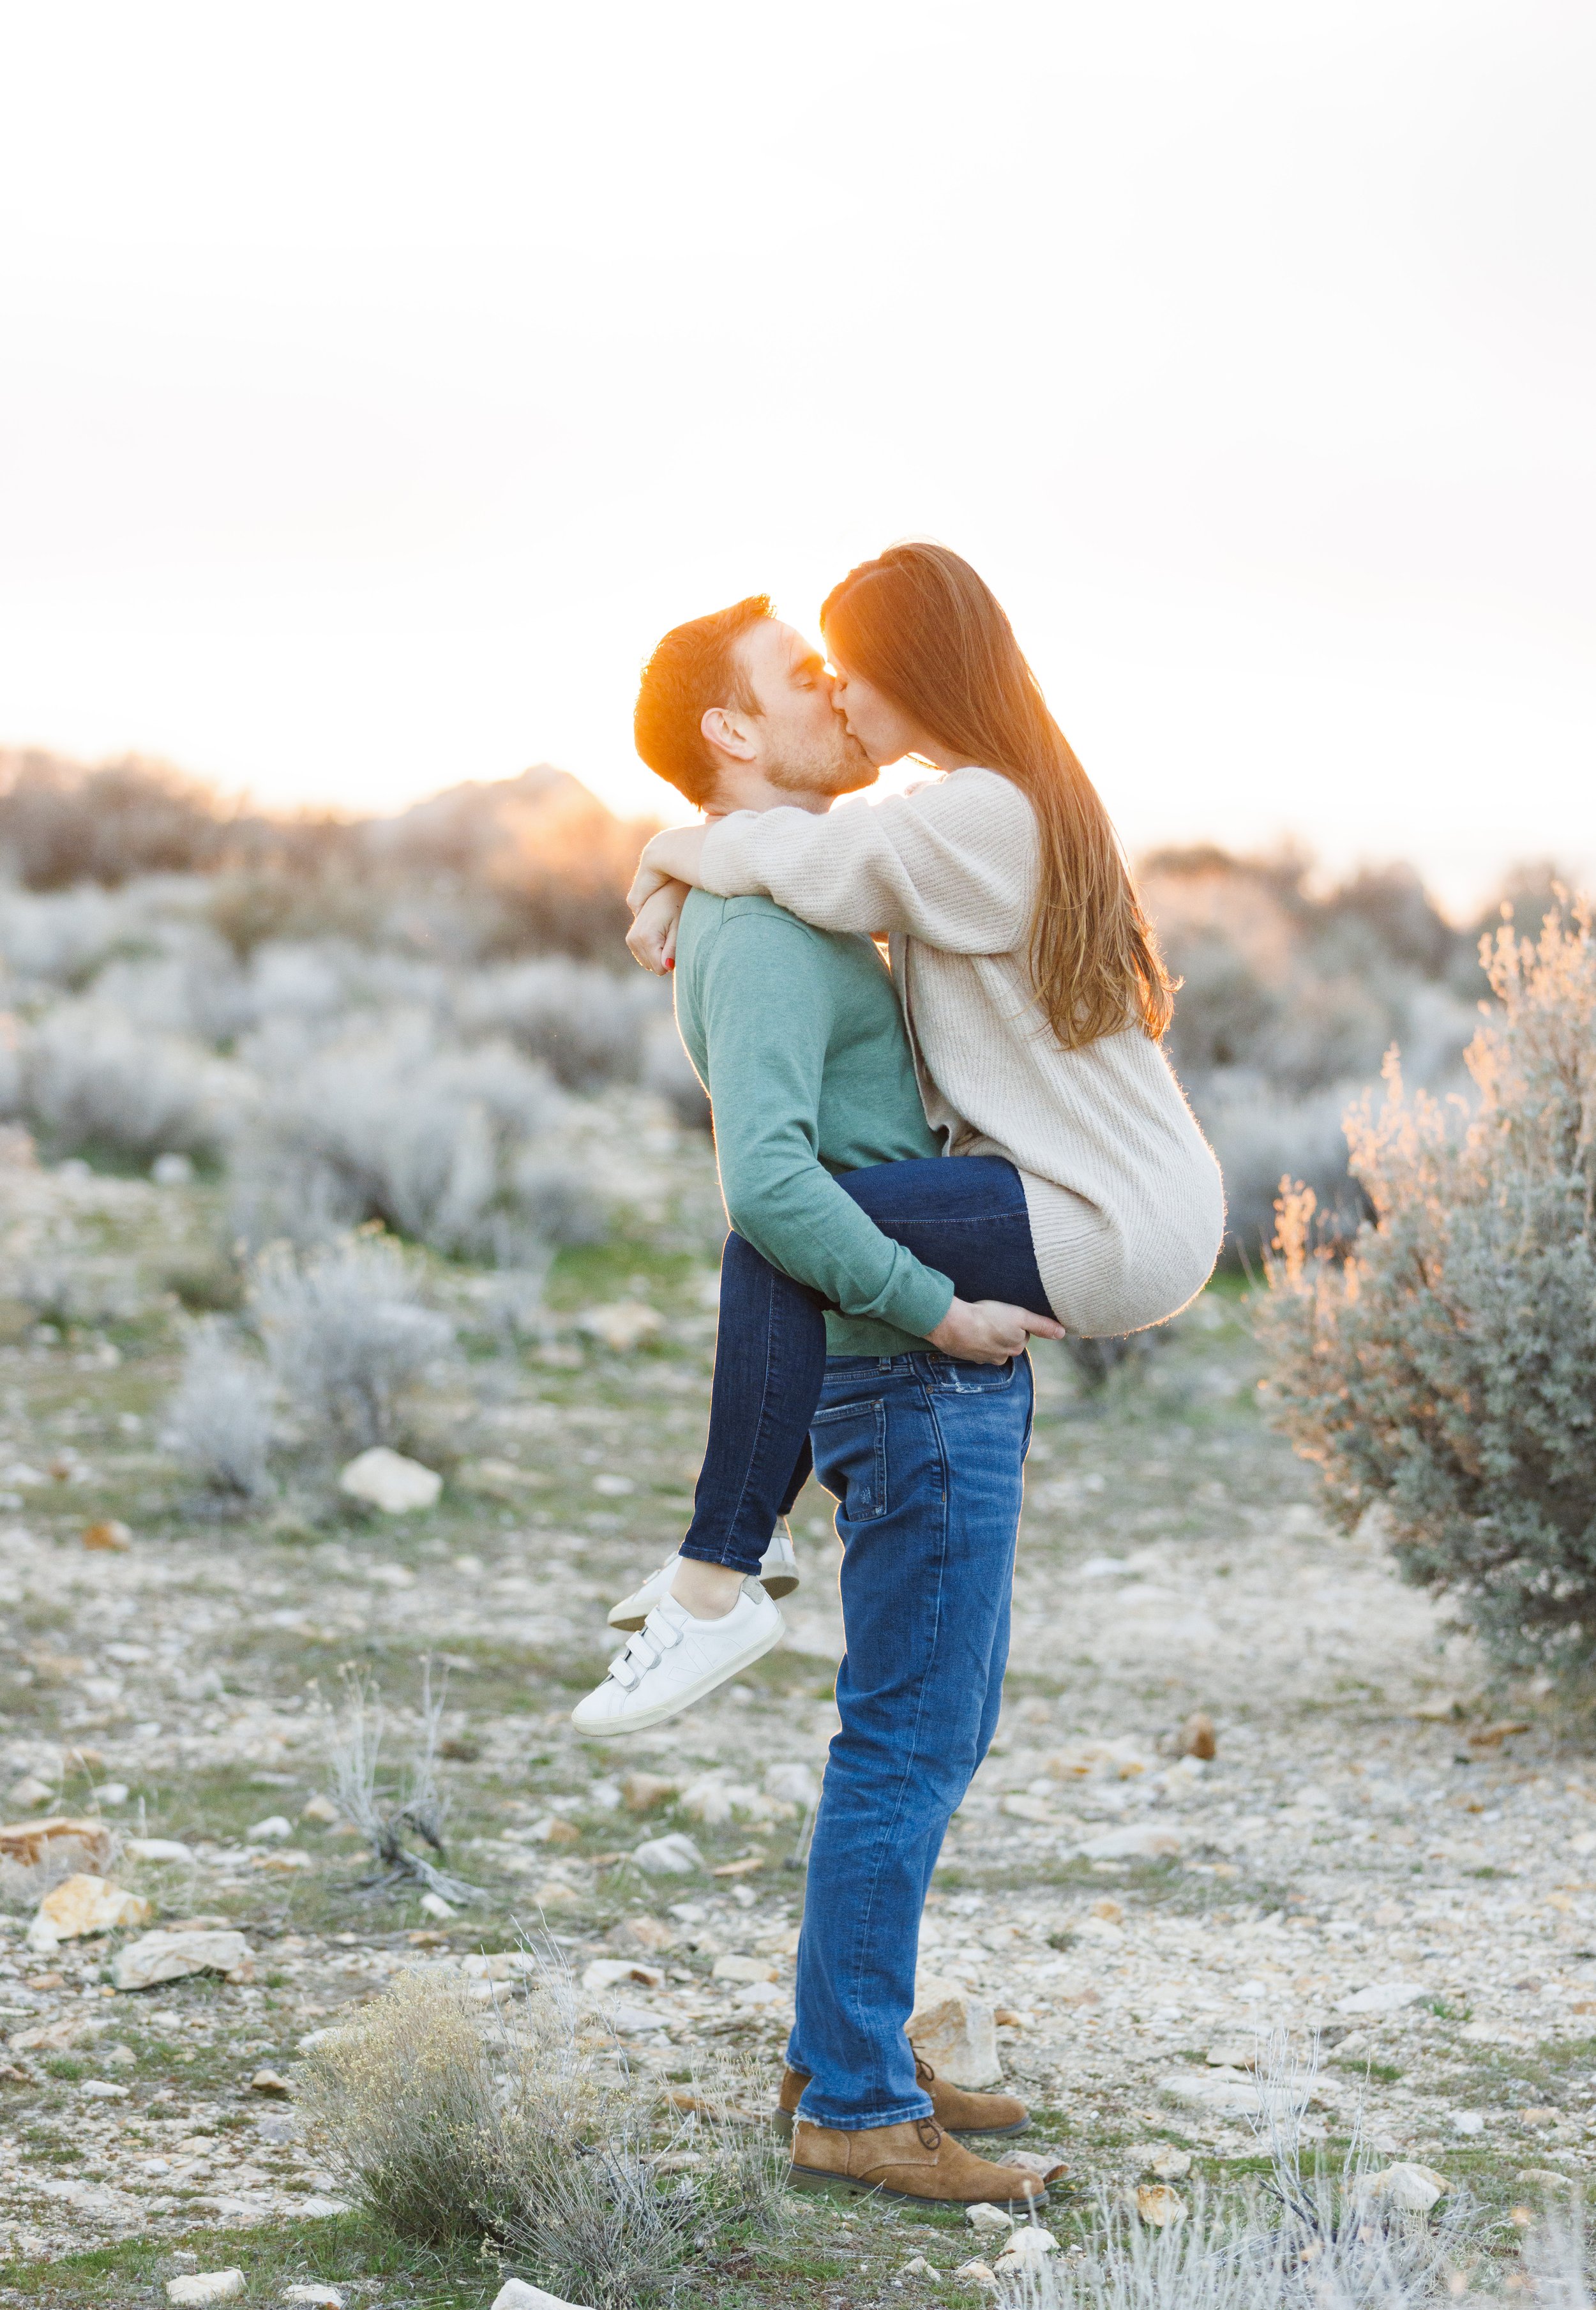  At sunset on Antelope Island, a woman jumps up into her fiance's arms and kisses him by Savanna Richardson Photography. romantic engagement photos sunset kisses #SavannaRichardsonPhotography #SavannaRichardsonEngagements #UtahEngagements #AntelopeIs